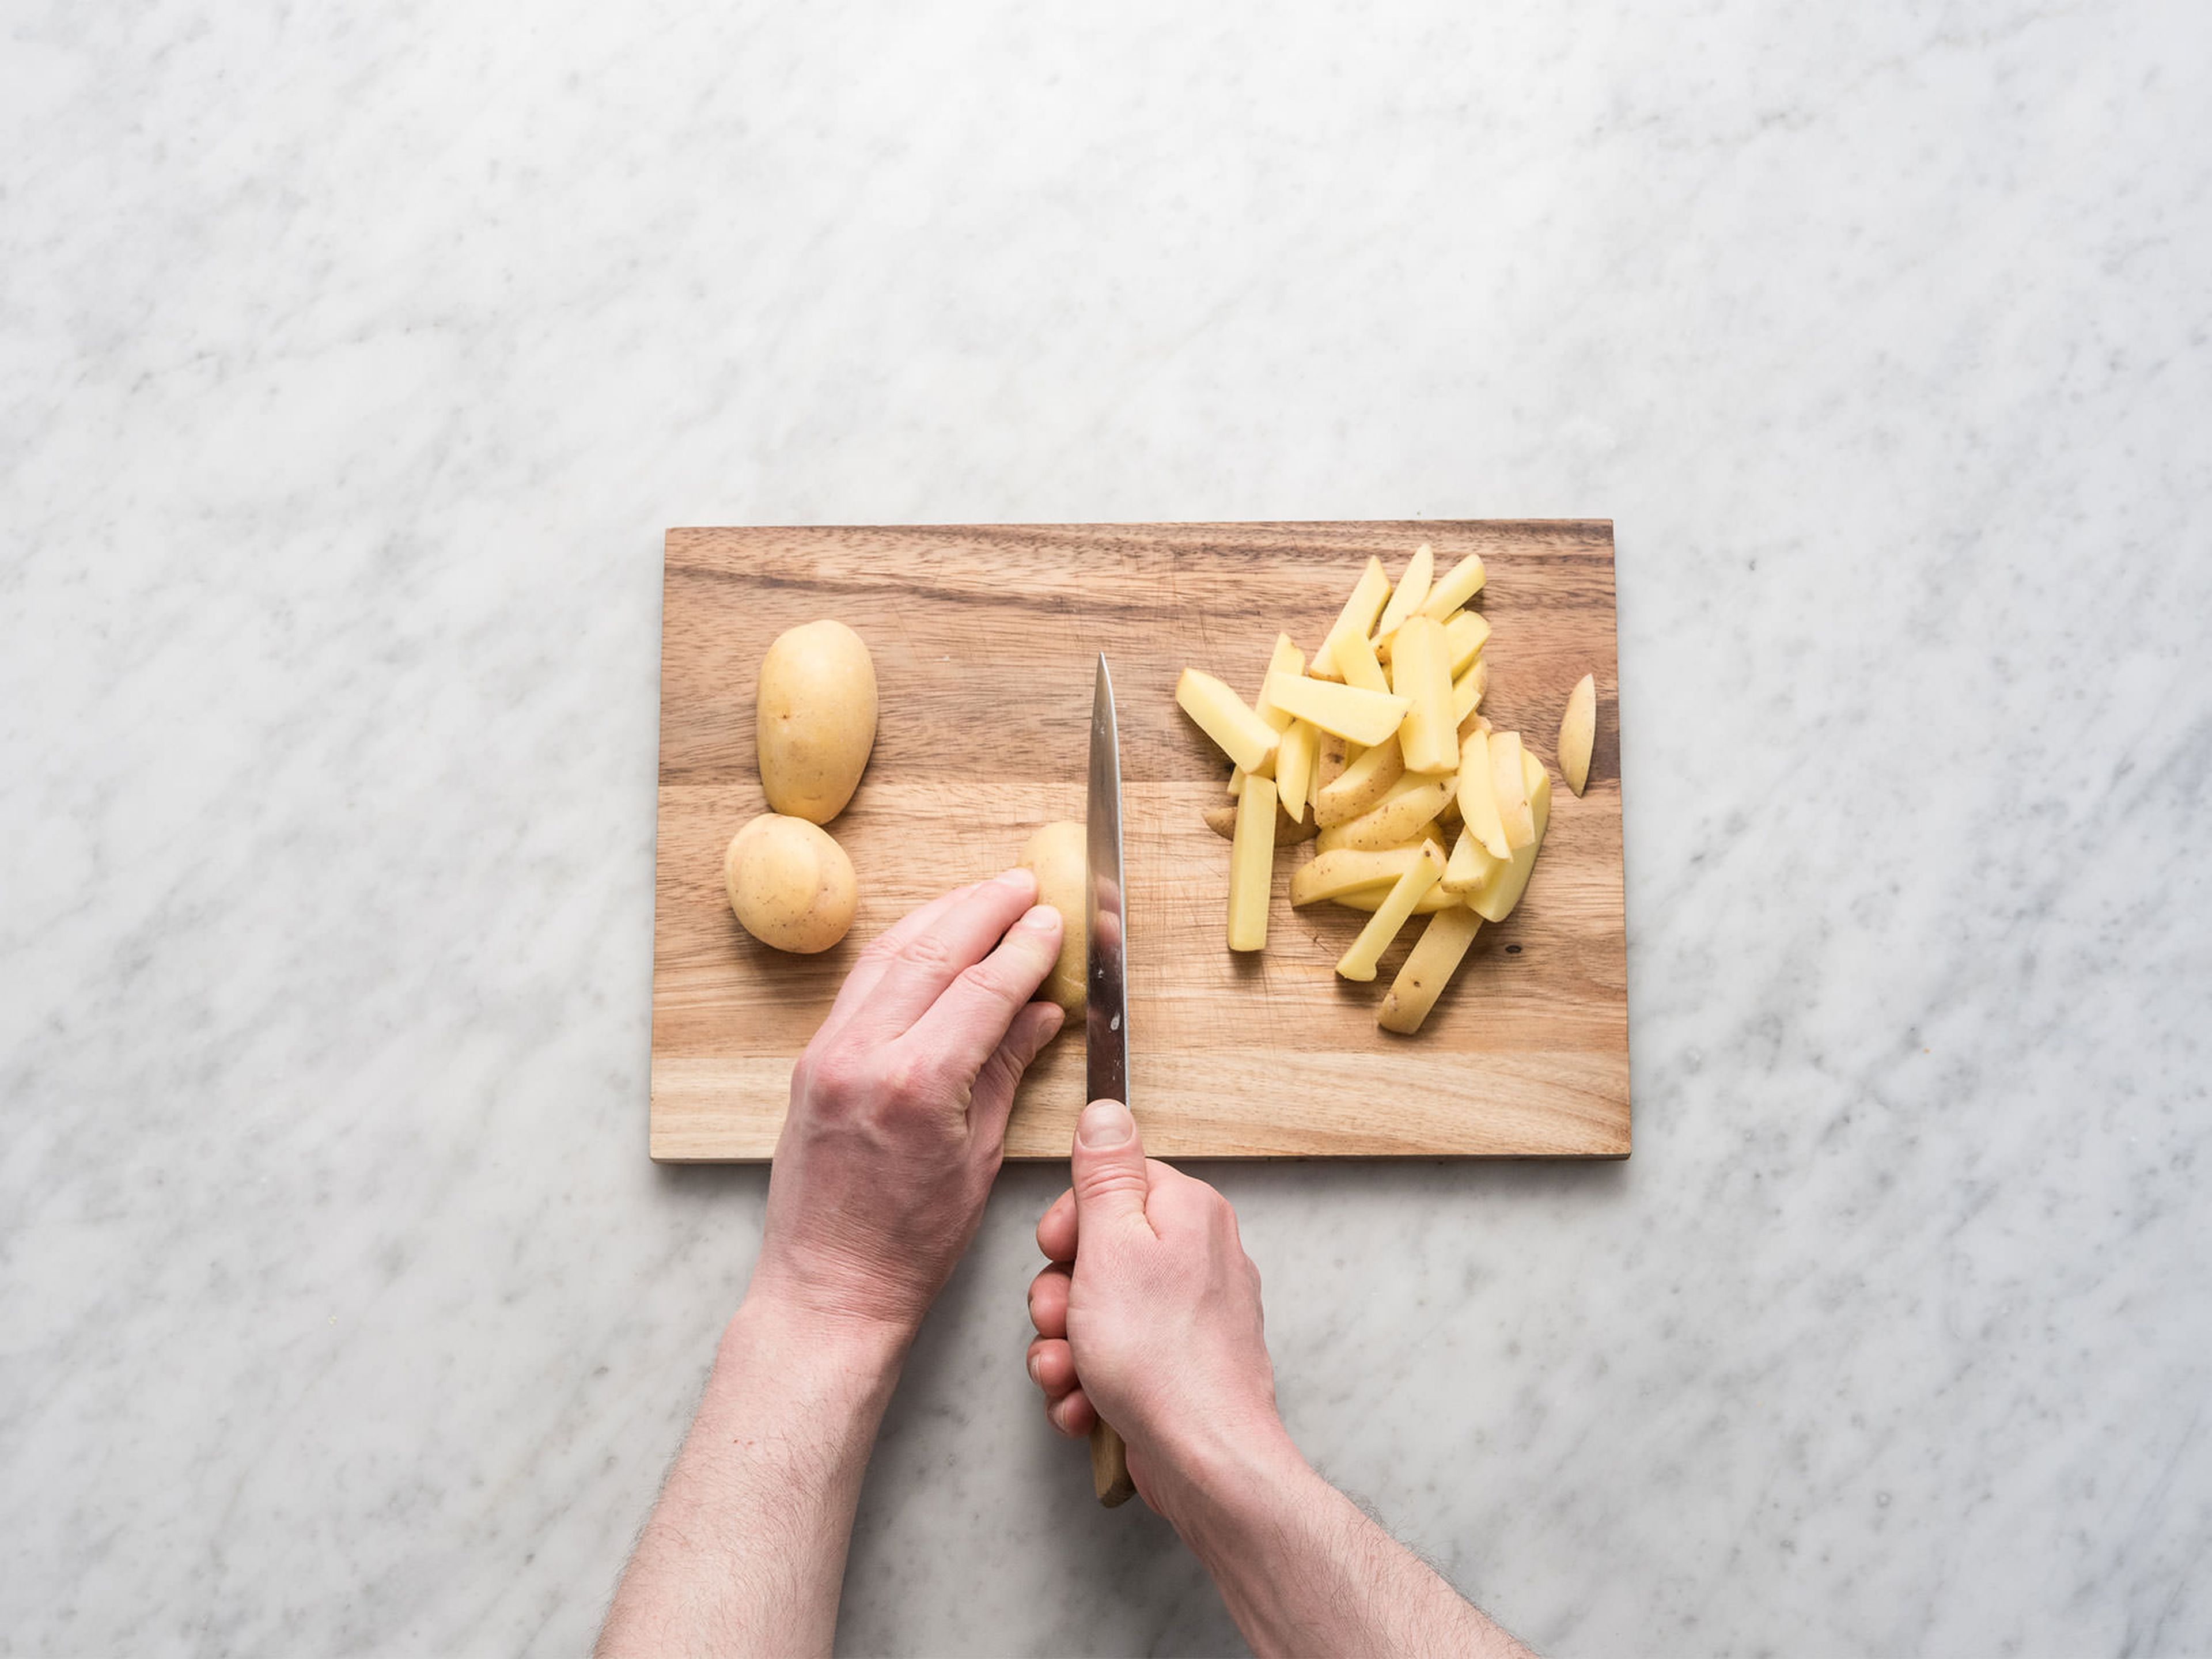 Preheat oven to 200°C/390°F. Cut potatoes into thin, French fry-shaped strips. In a large bowl, toss with olive oil, curry powder, ground nutmeg, and smoked salt. Transfer to a parchment paper-lined baking sheet and bake in preheated oven, turning occasionally, at 200°C/390°F for approx. 25 – 30 min. until crispy and golden.